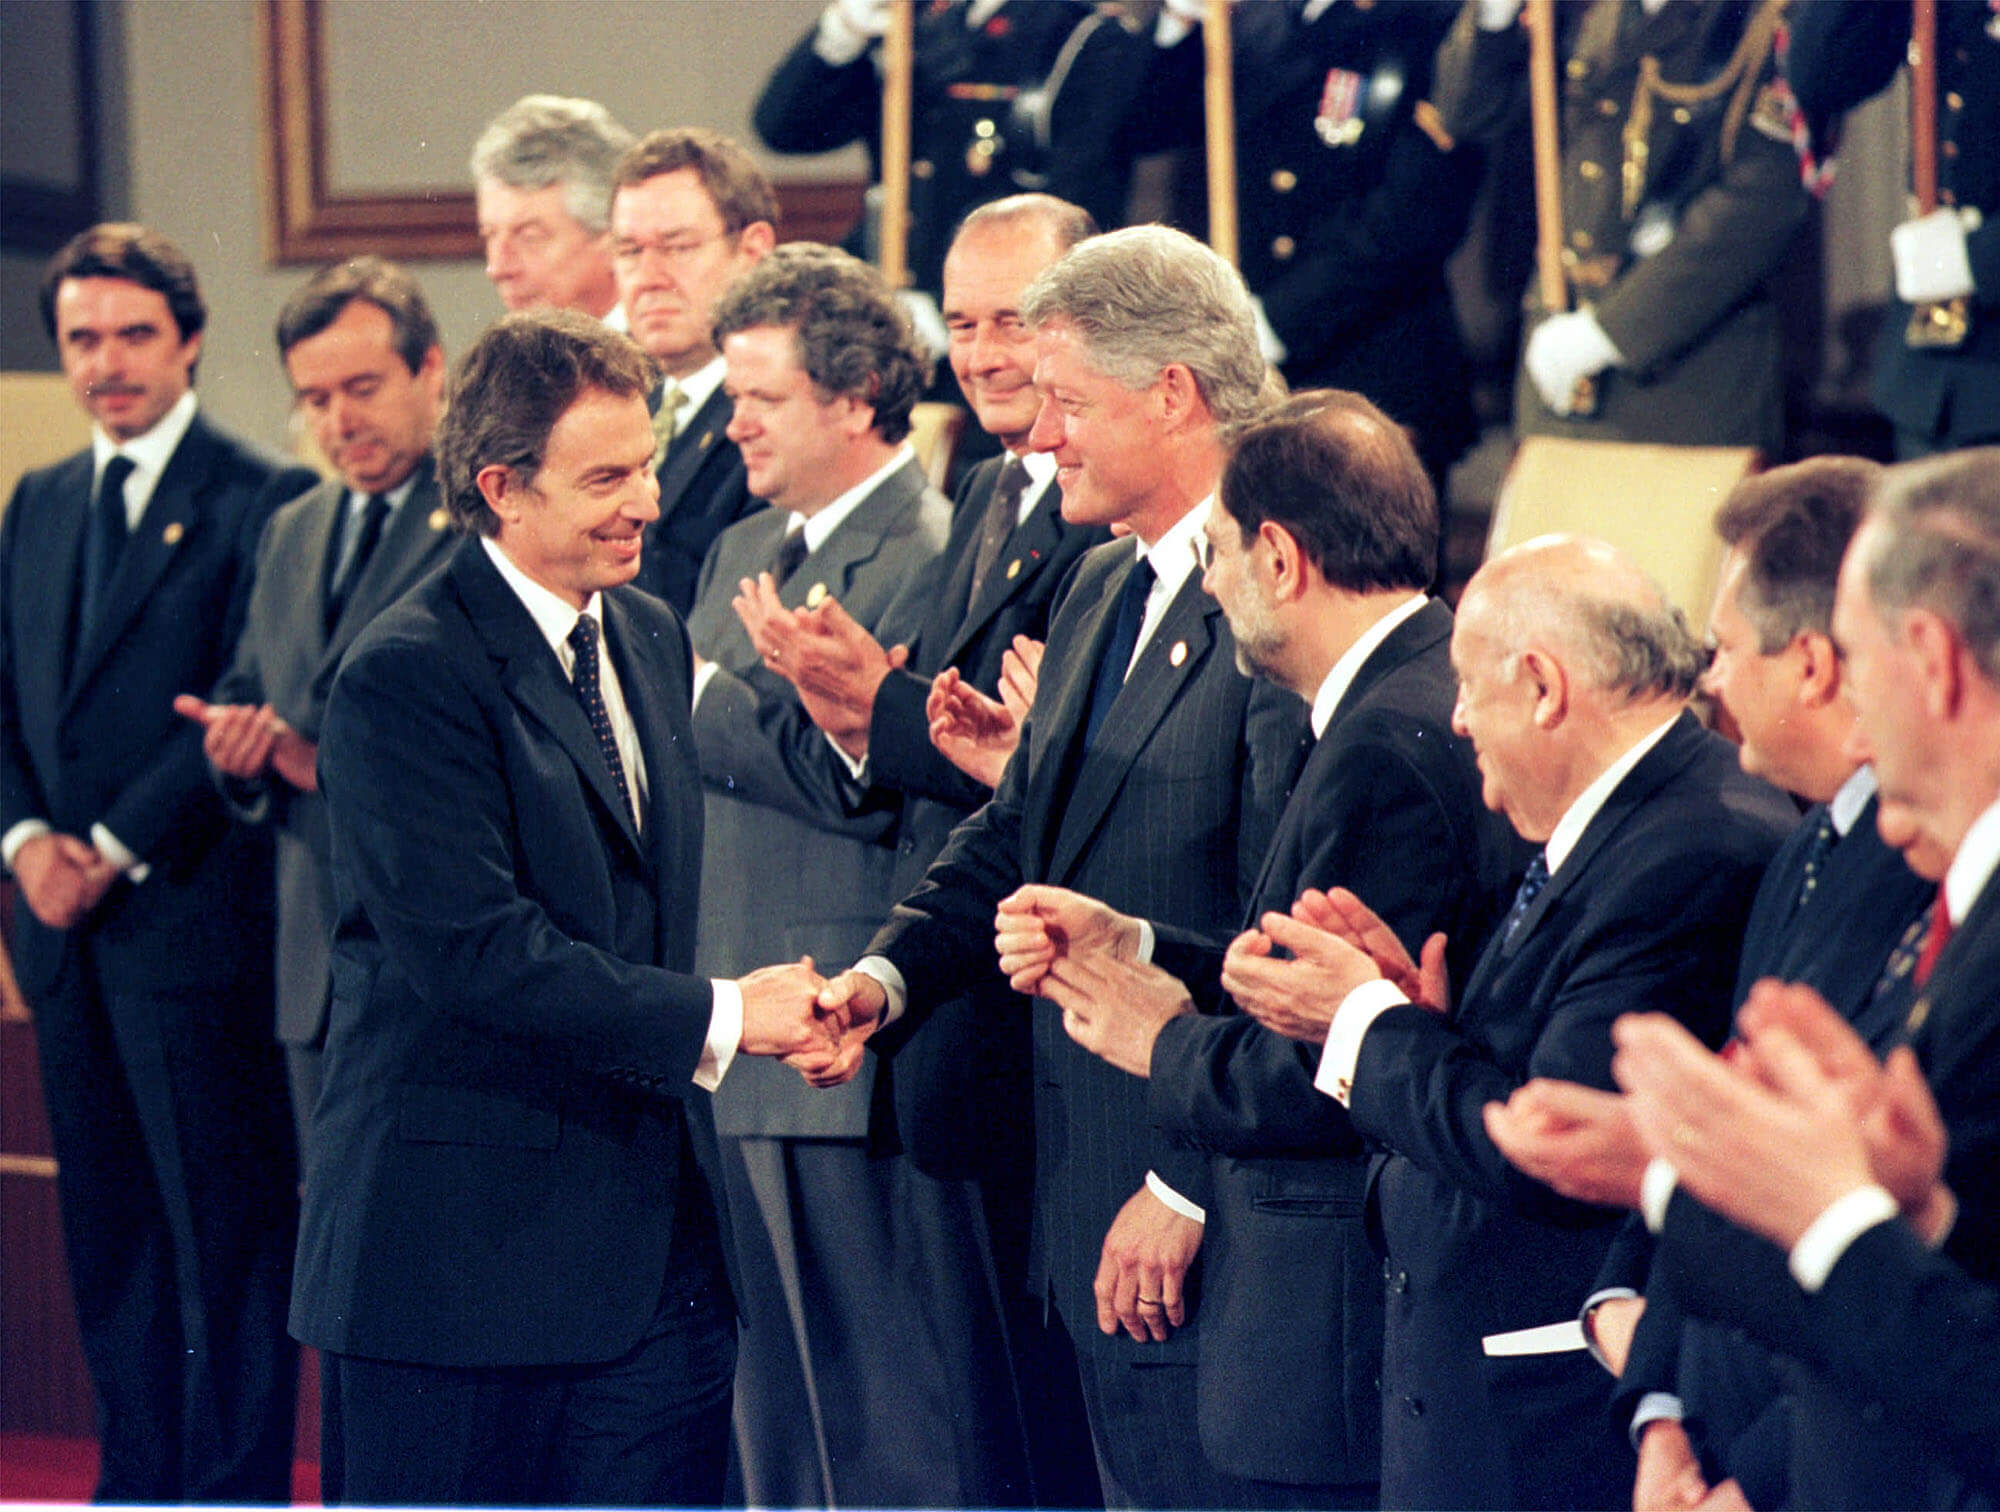 British Prime Minister Tony Blair Shakes Hands With President Bill Clinton At The Commerative Ceremony Of Nato's 50Th Anniversary April 23, 1999 (Pool/Hulton Archive via Getty Images)